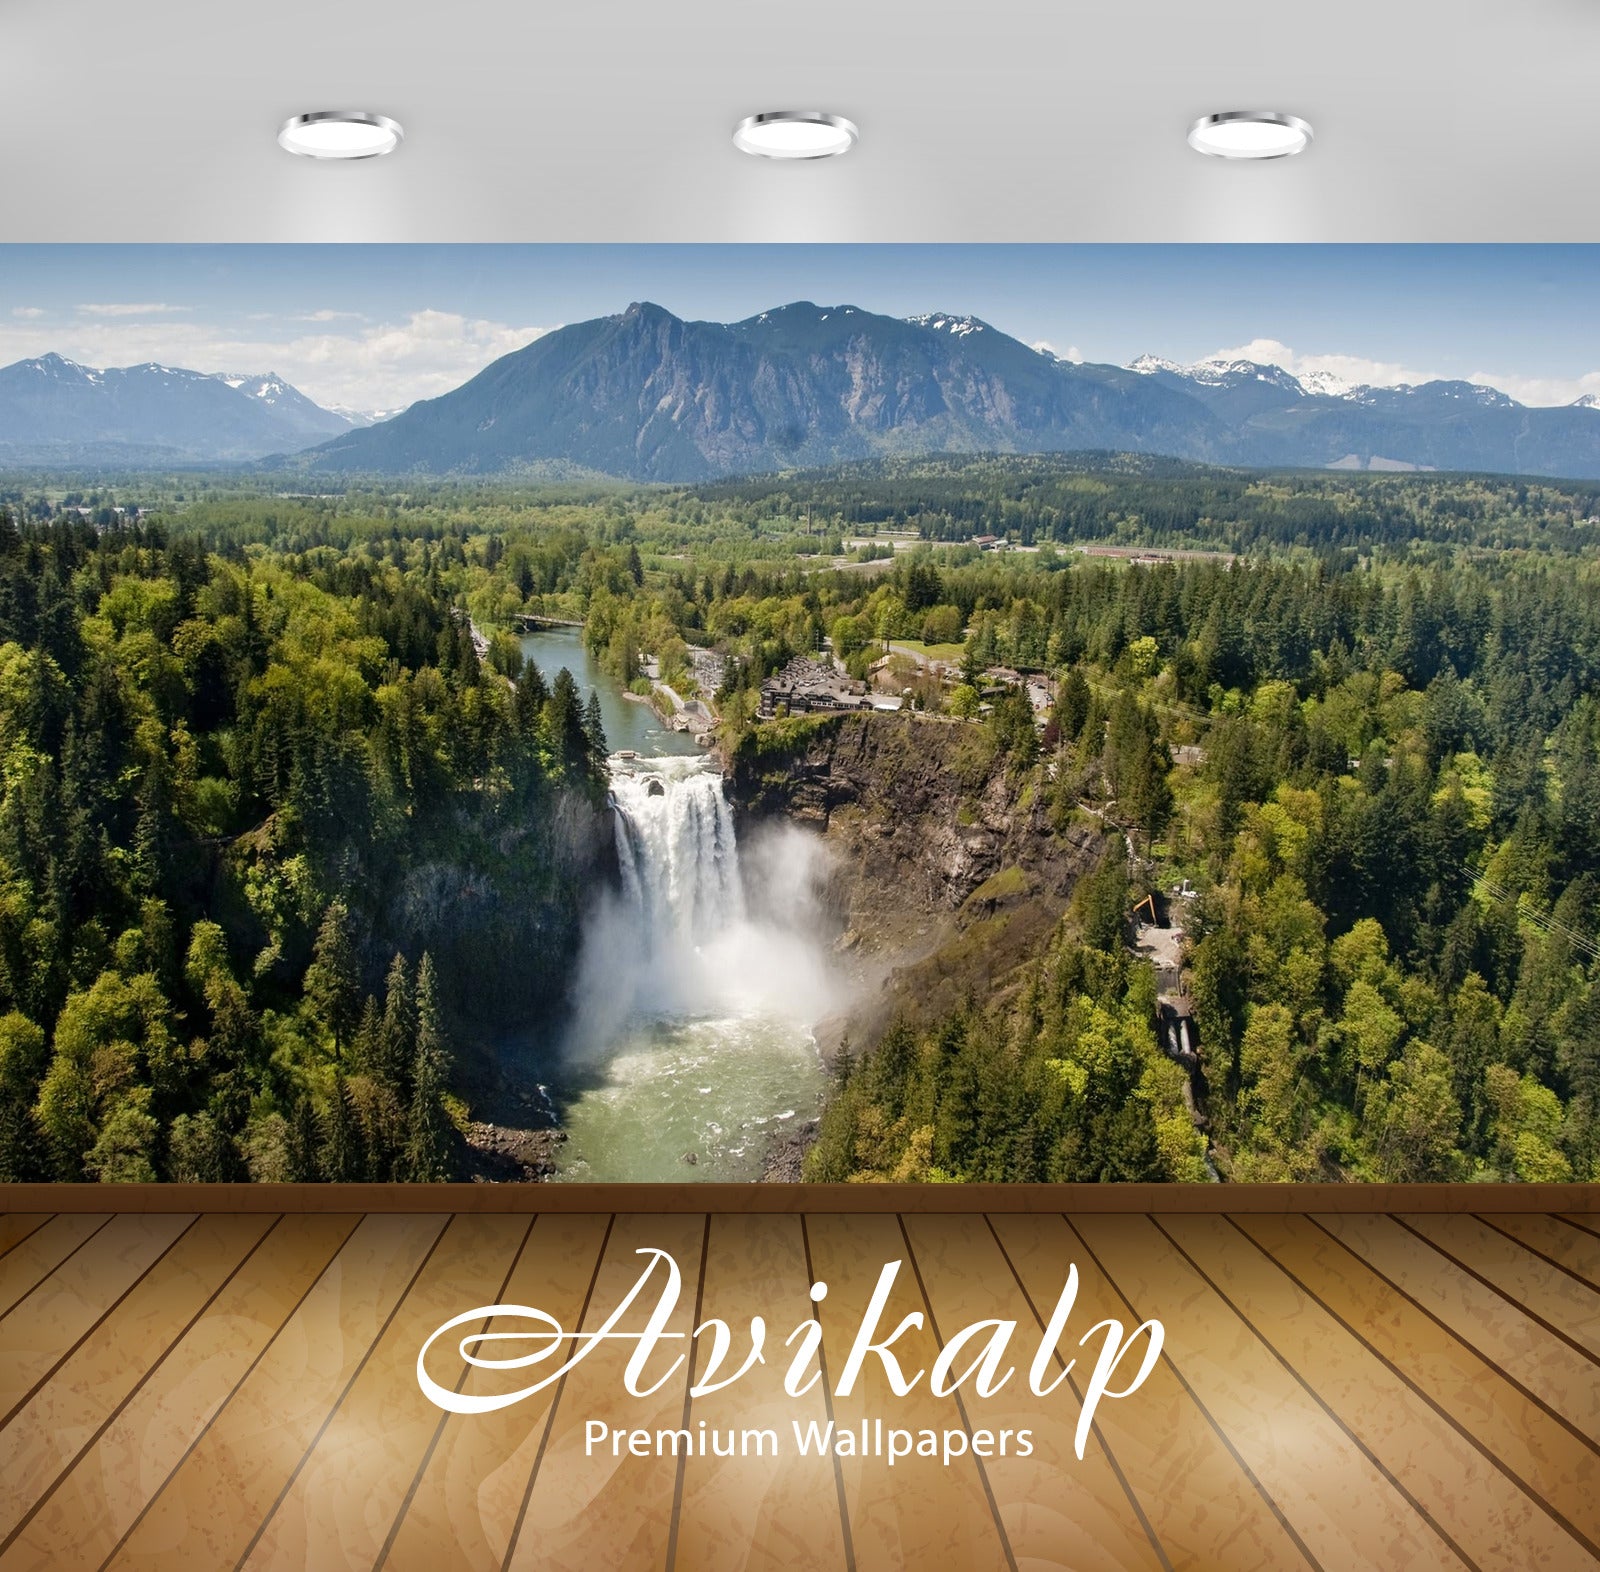 Avikalp Exclusive Awi6576 Top View Of Snoqualmie Falls Nature Full HD Wallpapers for Living room, Ha